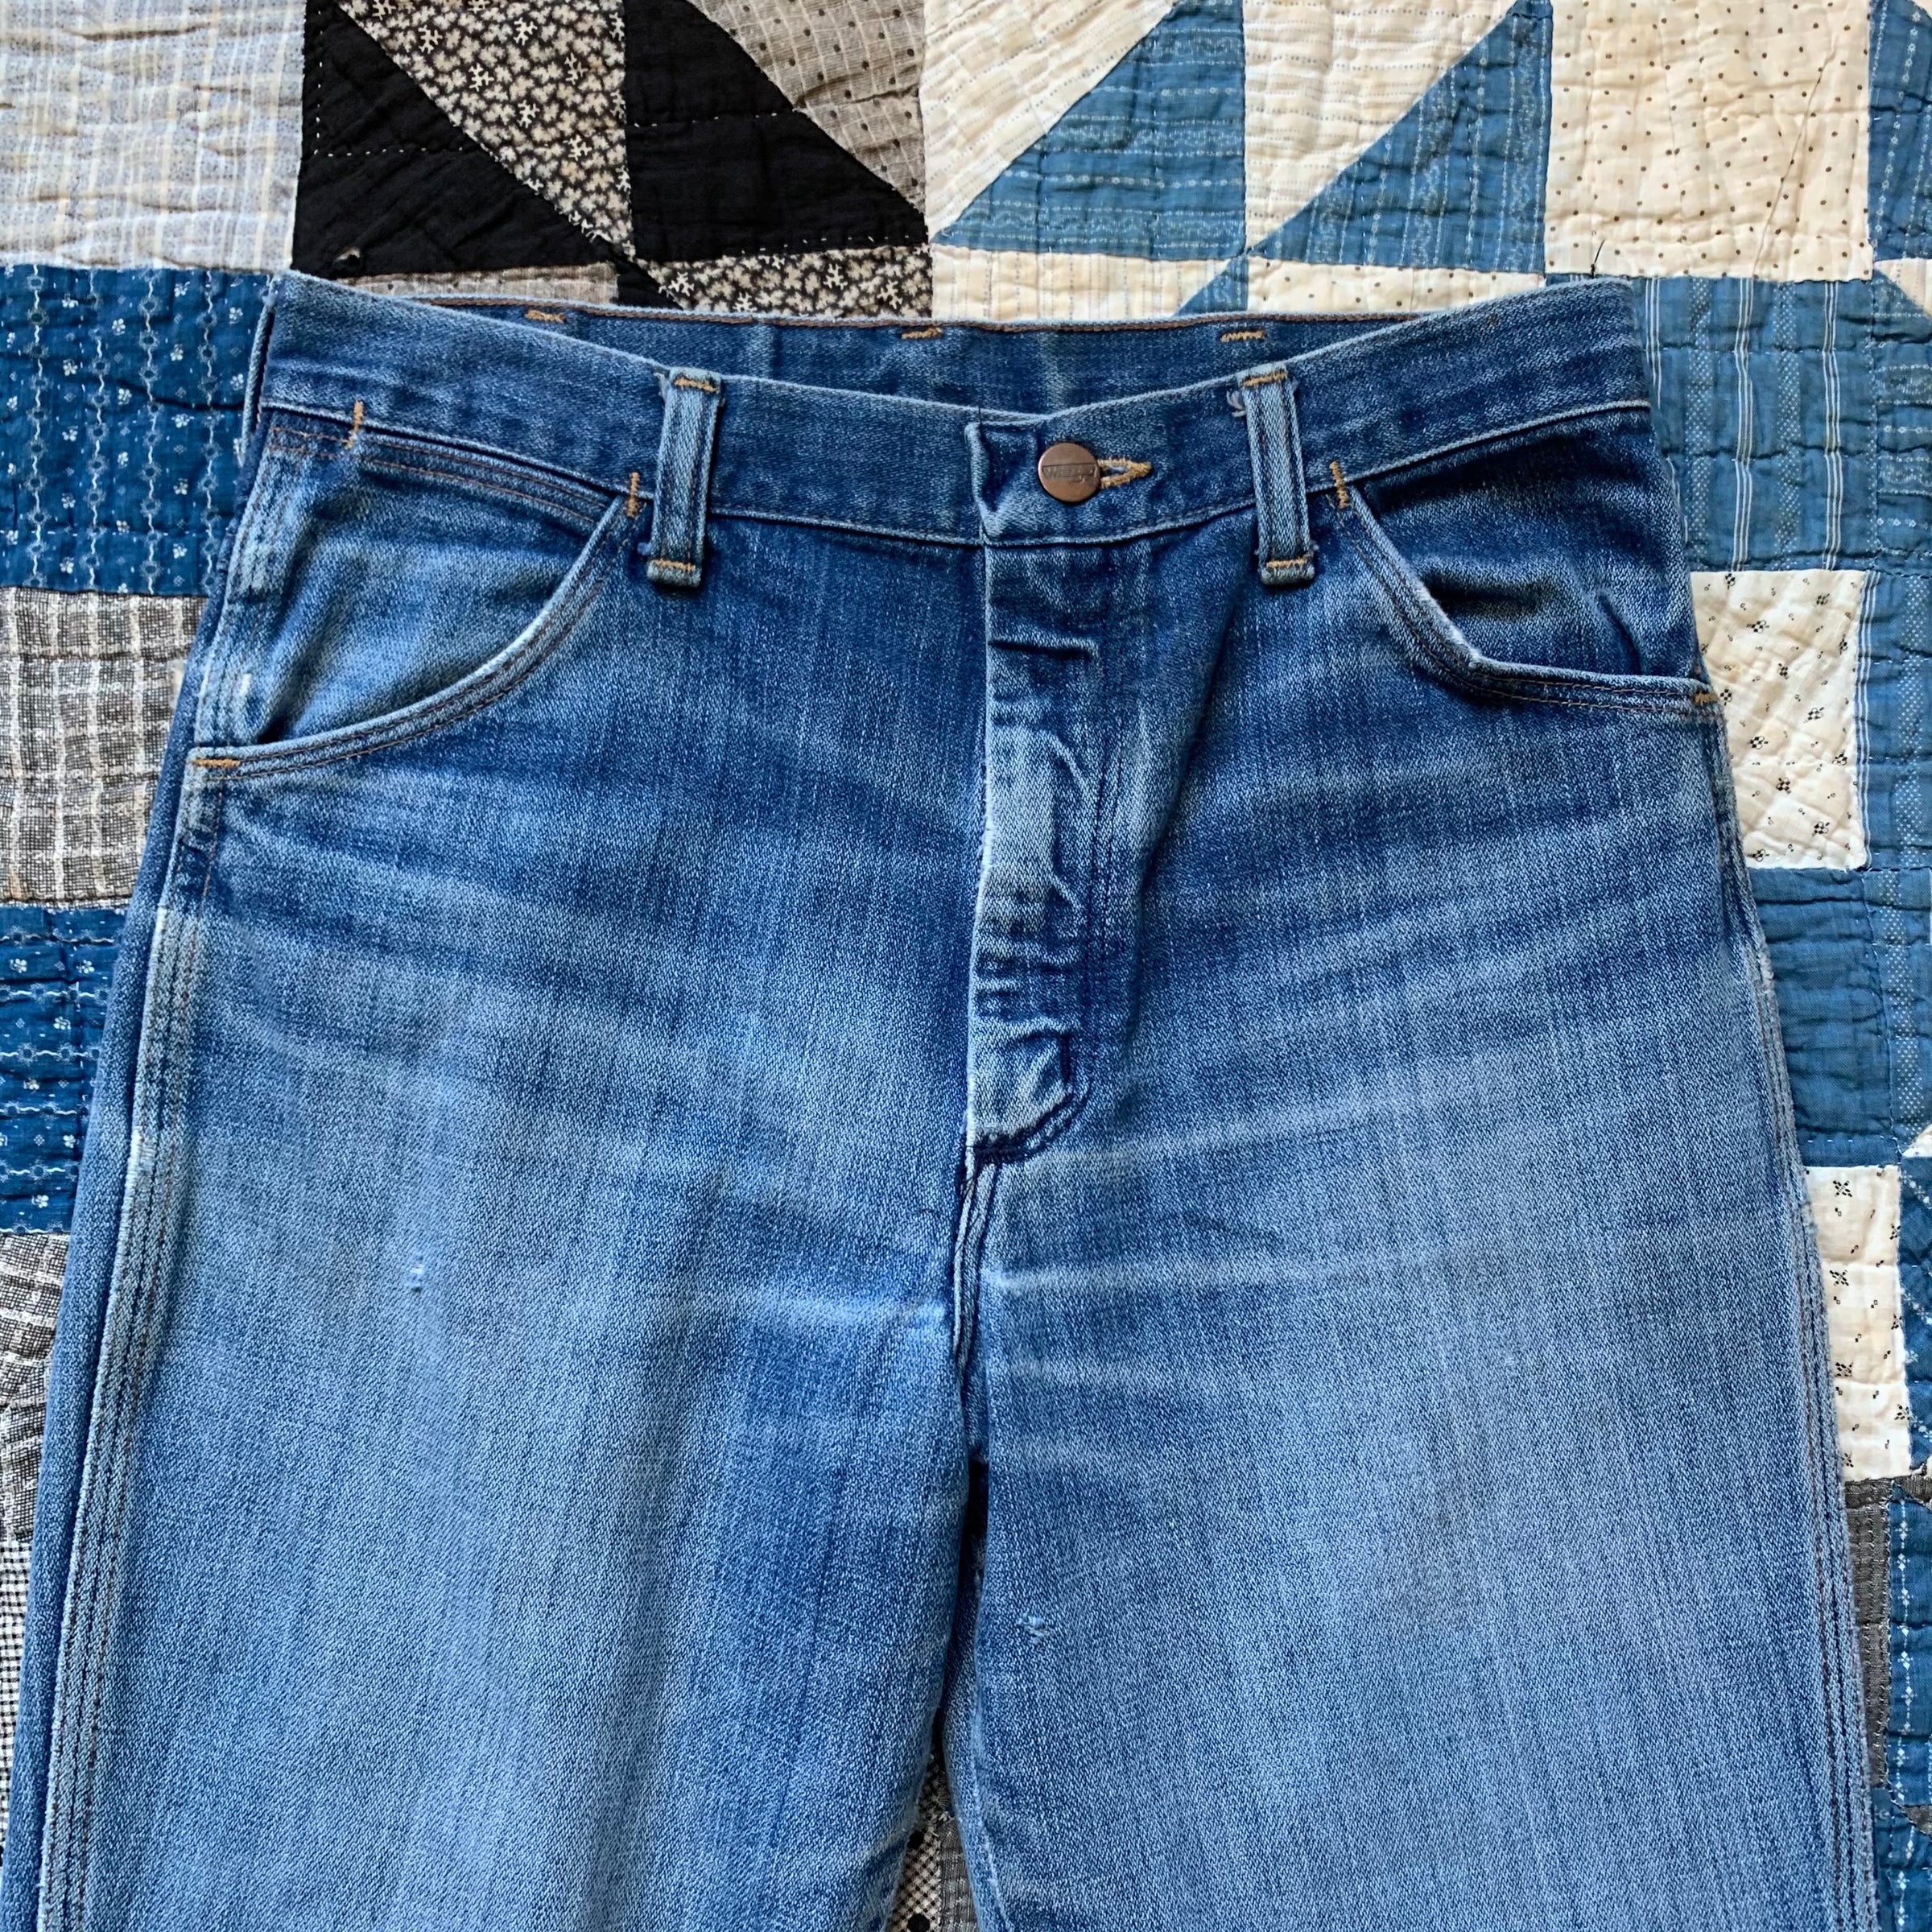 1970's Distressed Wrangler Flared Jeans 28" x 31.5"